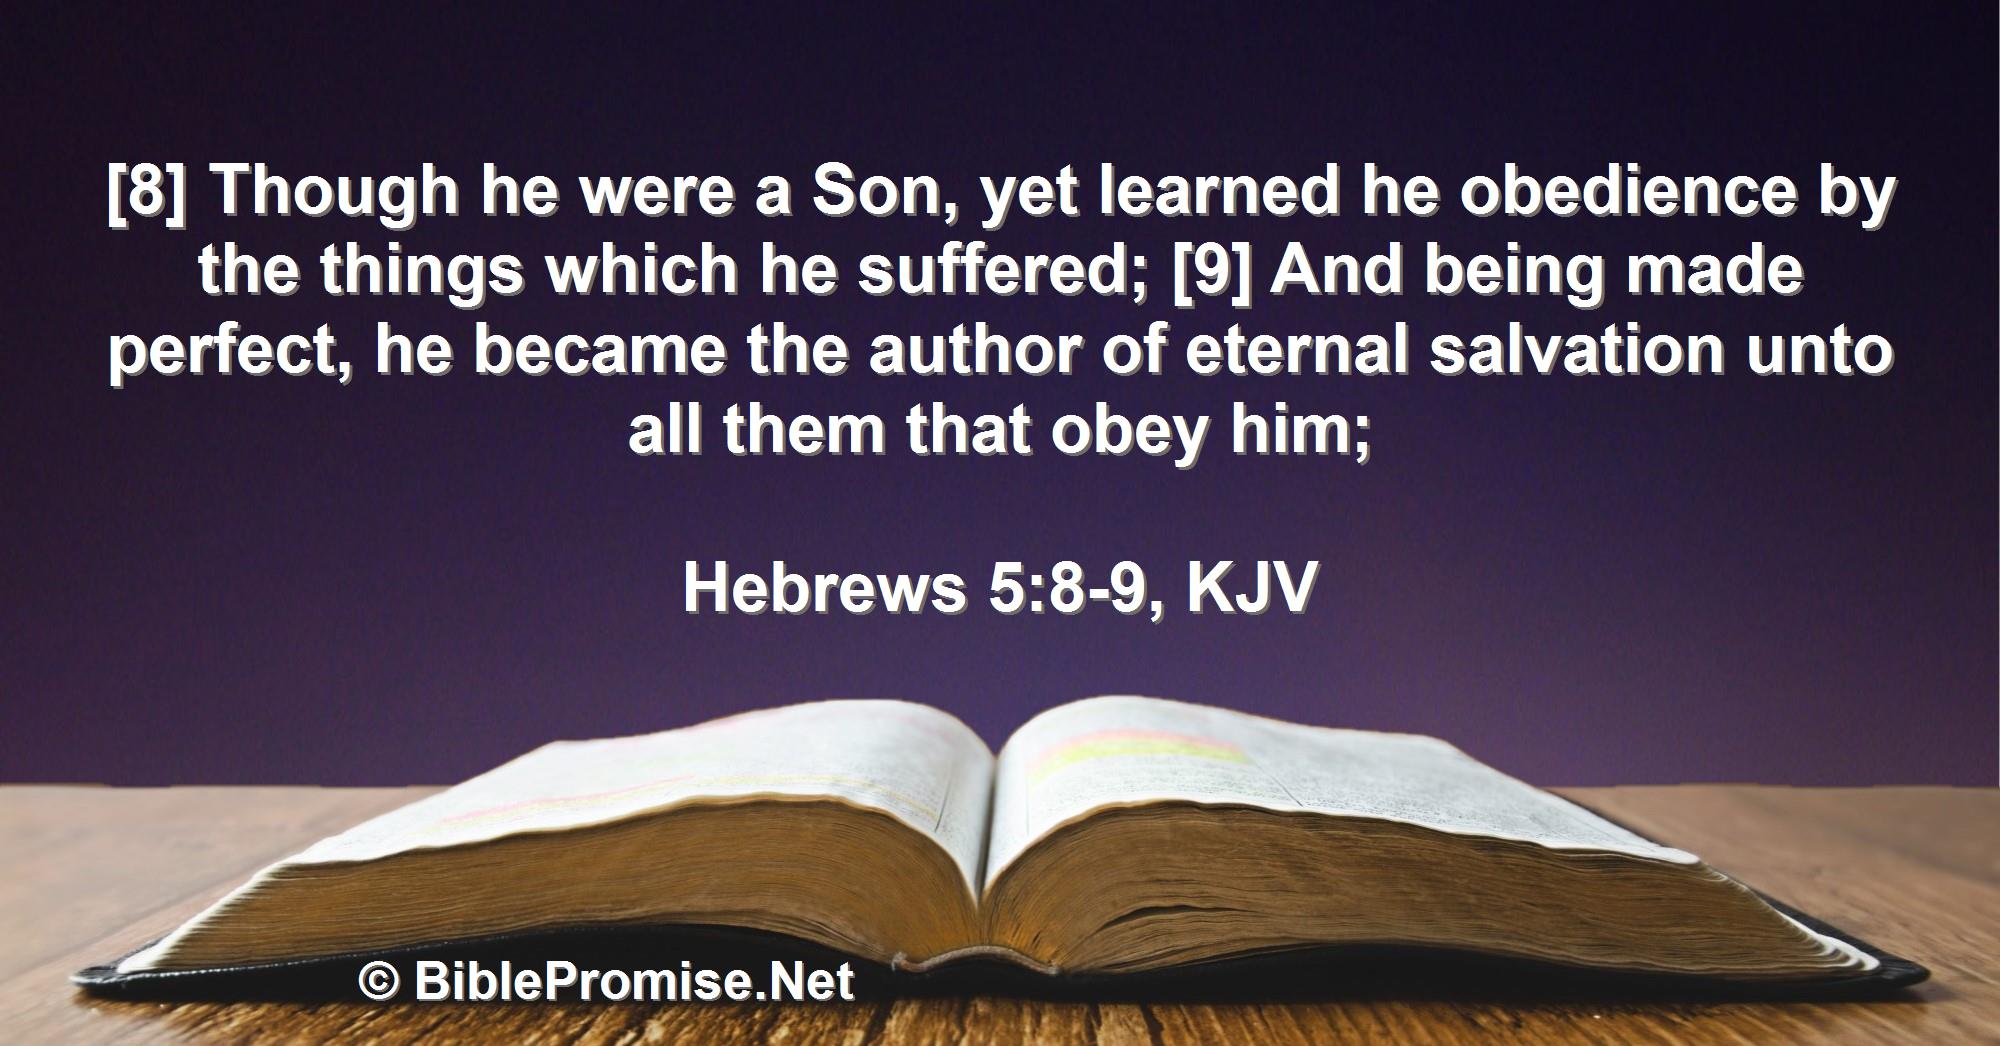 Monday, September 26, 2022 - Hebrews 5:8-9 (KJV) - Bible promise that if you obey Jesus he will save you for eternity.